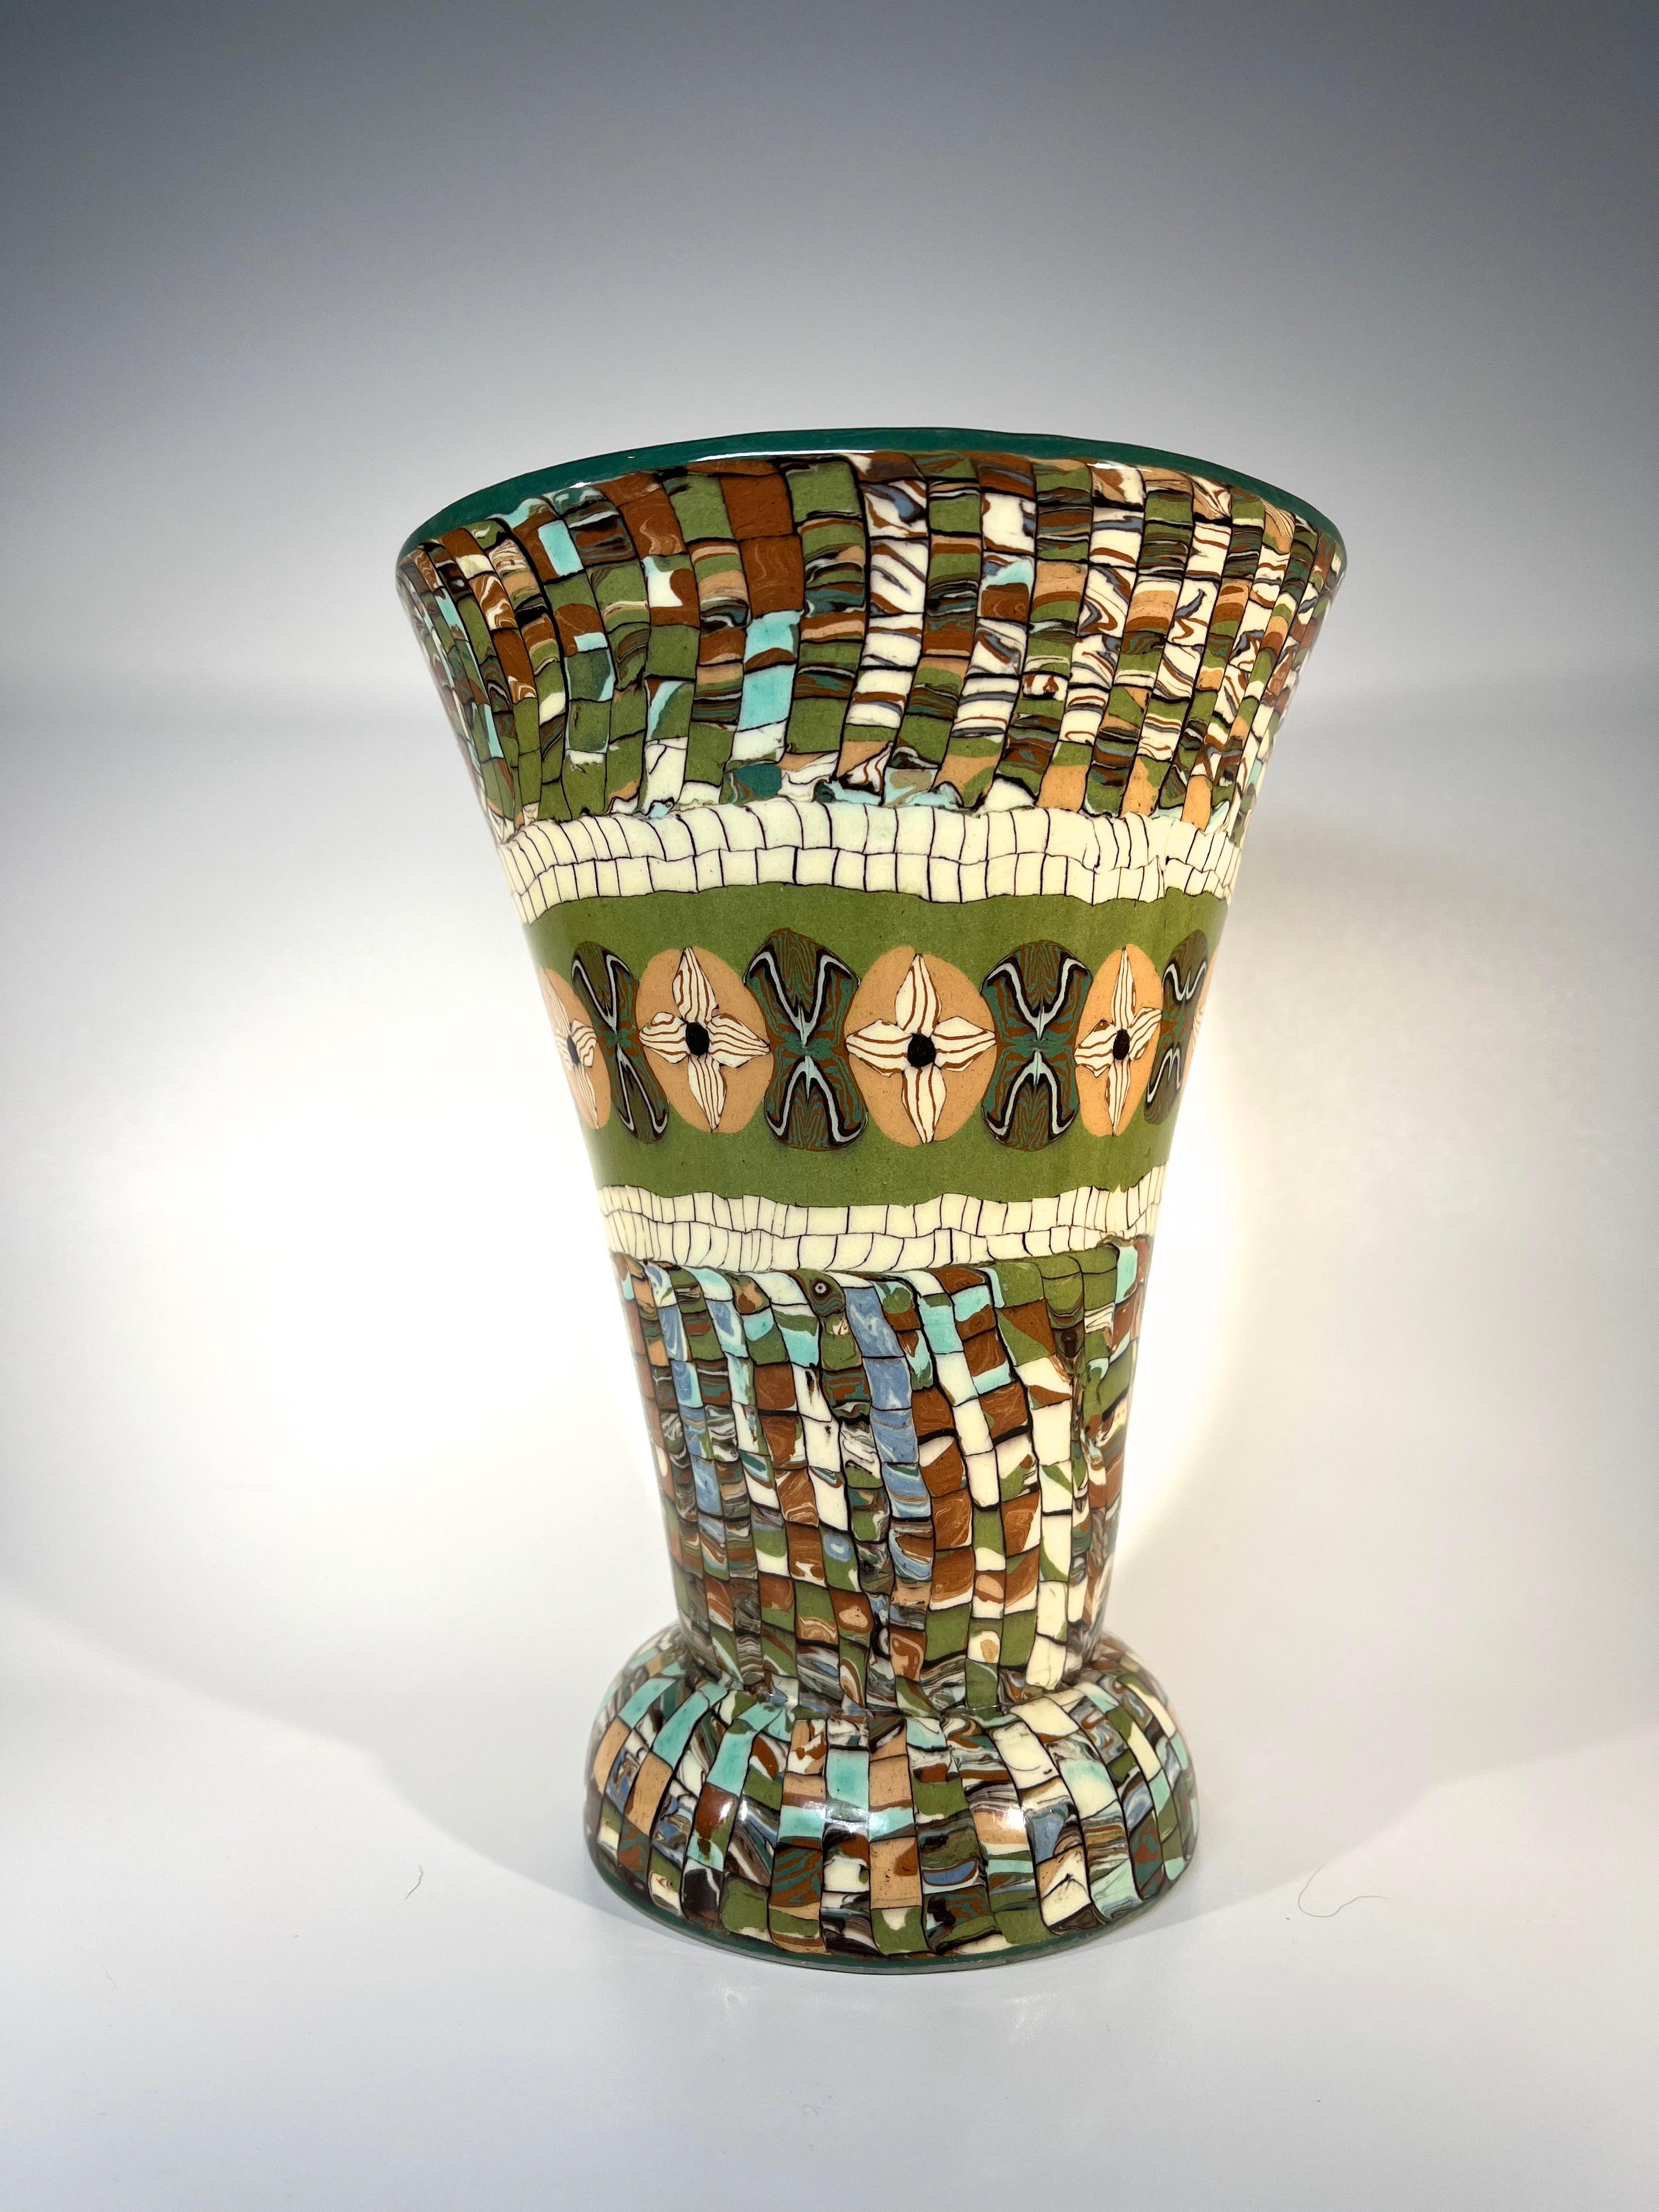 Created by the master ceramicist Jean Gerbino for Vallauris, a superbly designed flared shaped vase with mosaic patterning in tones of leaf green, sage, sand and cream
Circa 1960's
Signed Gerbino and Vallauris to base
Height 7.75 inch, Diameter 5.75